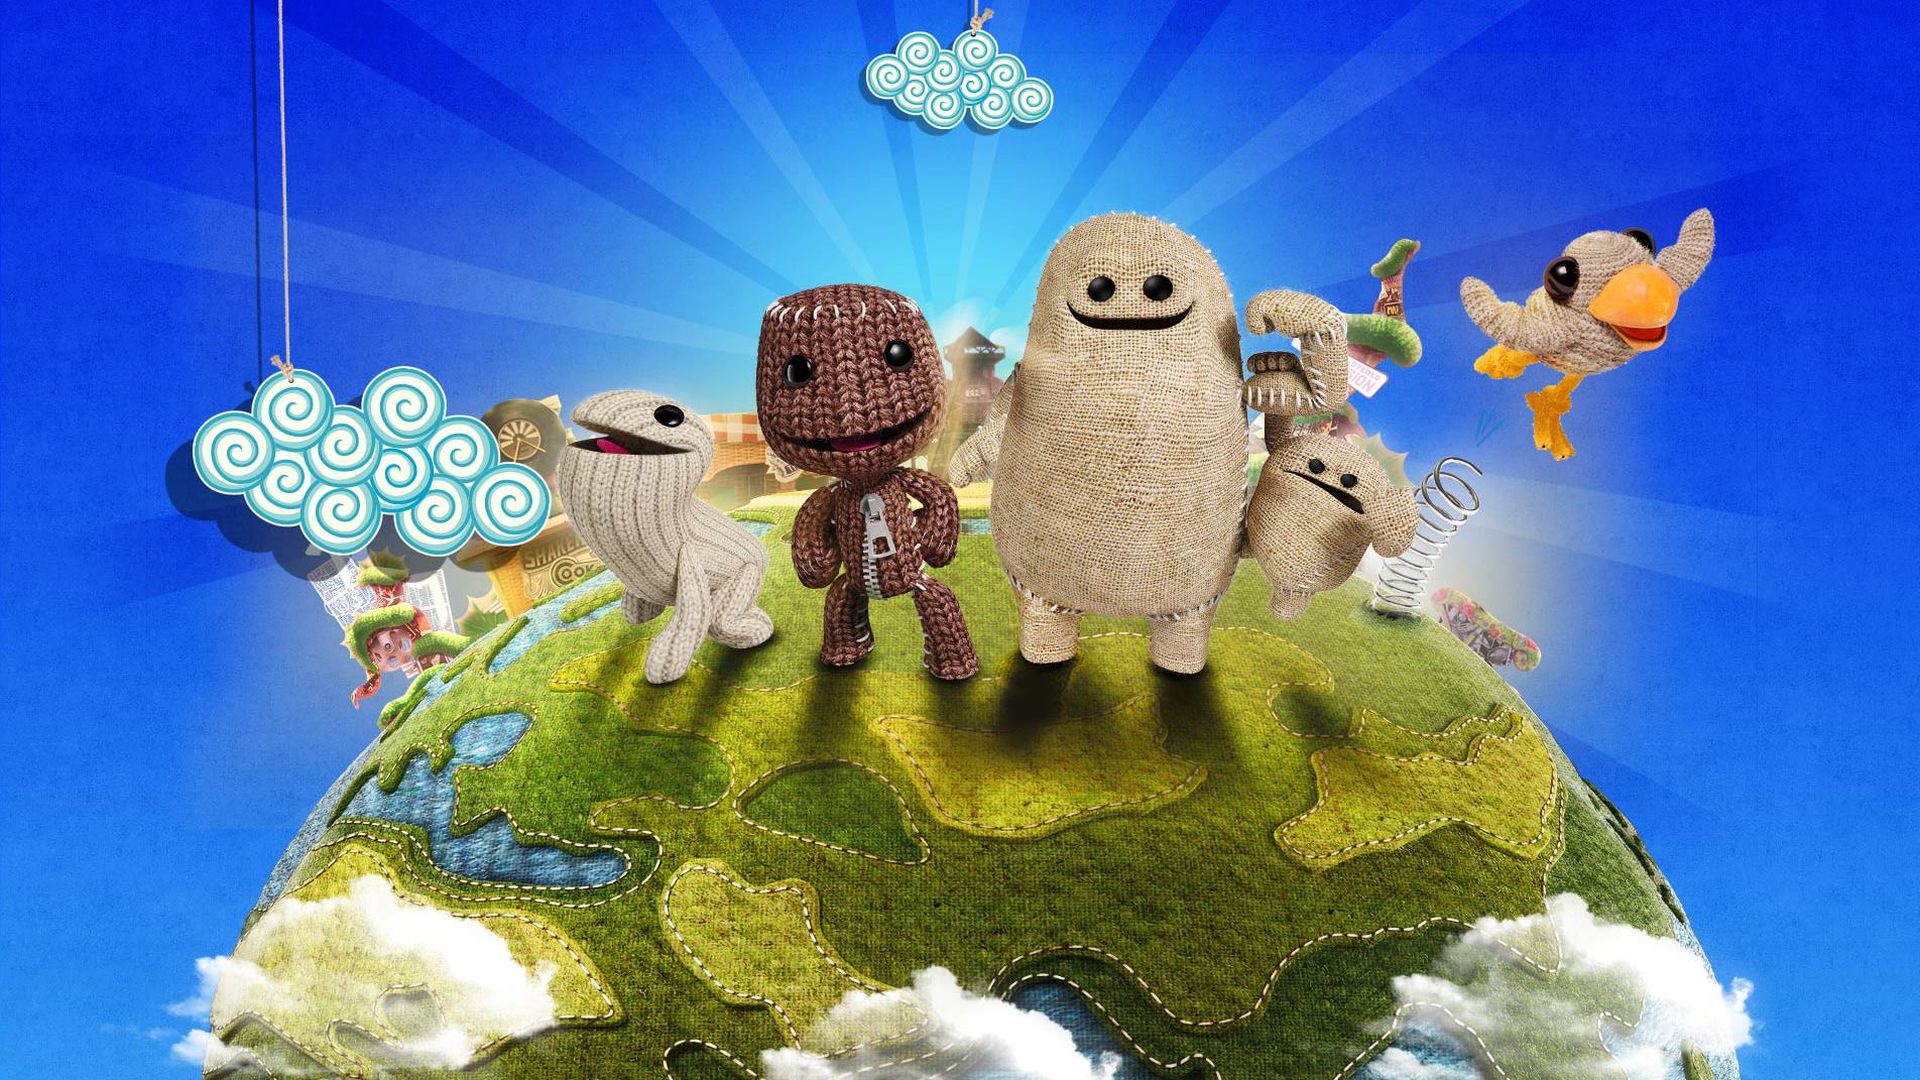 littlebigplanet 3 nukes servers and library of player creations